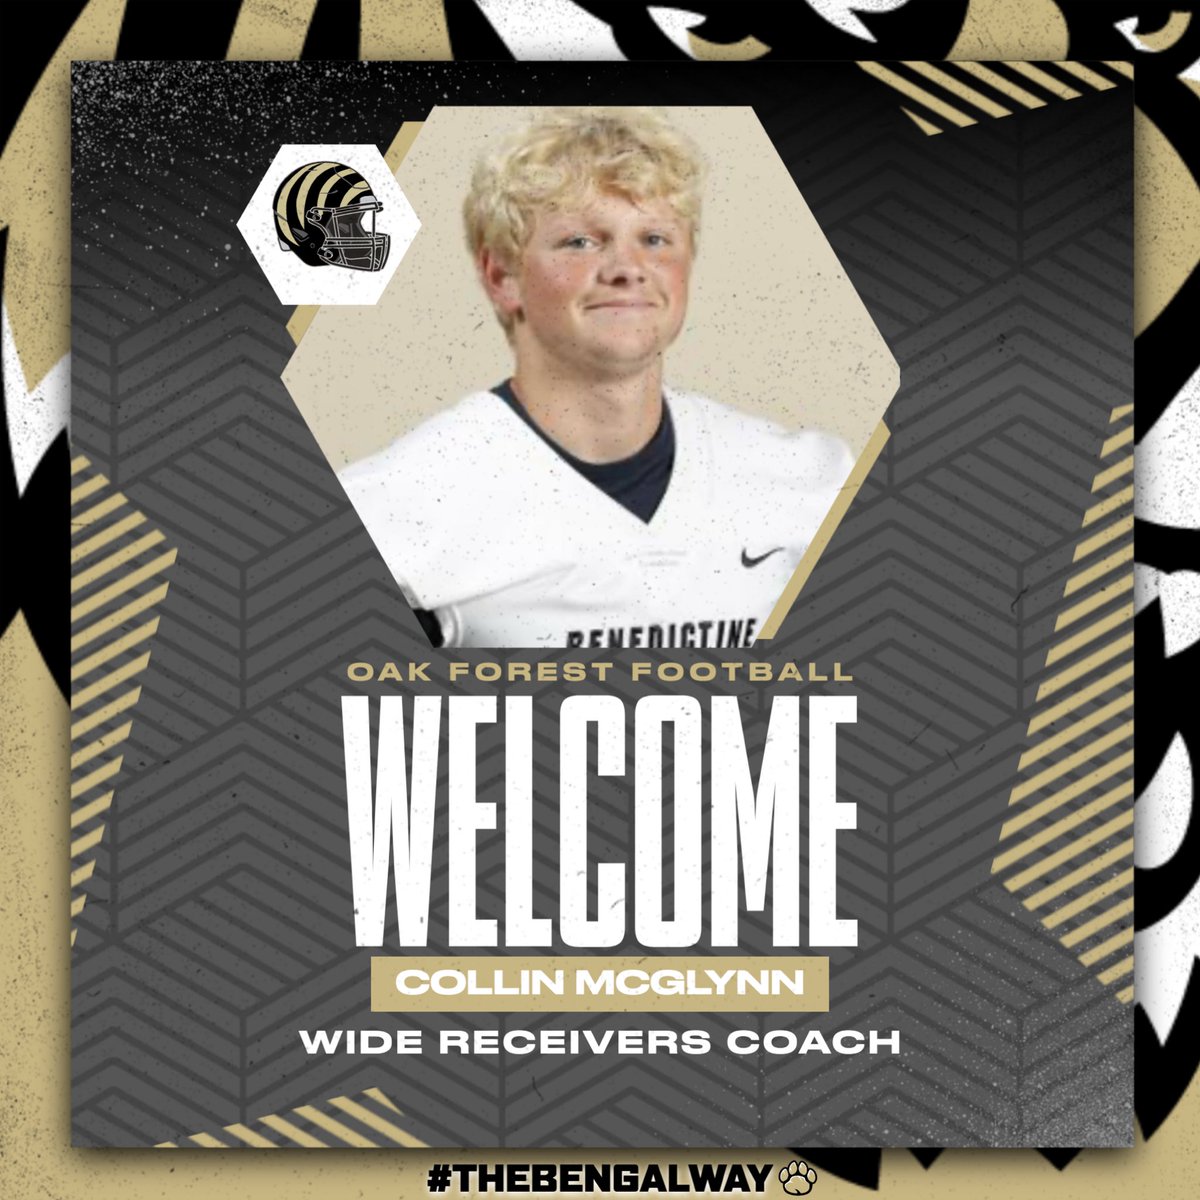 🚨BIG NEWS 🚨 Oak Forest Football would like to welcome Coach Collin McGlynn to our staff. Coach McGlynn will help coach the WR’s for our program. Coach McGlynn comes with multiple years of collegiate playing experience. Welcome Coach McGlynn!! #thebengalway🐅